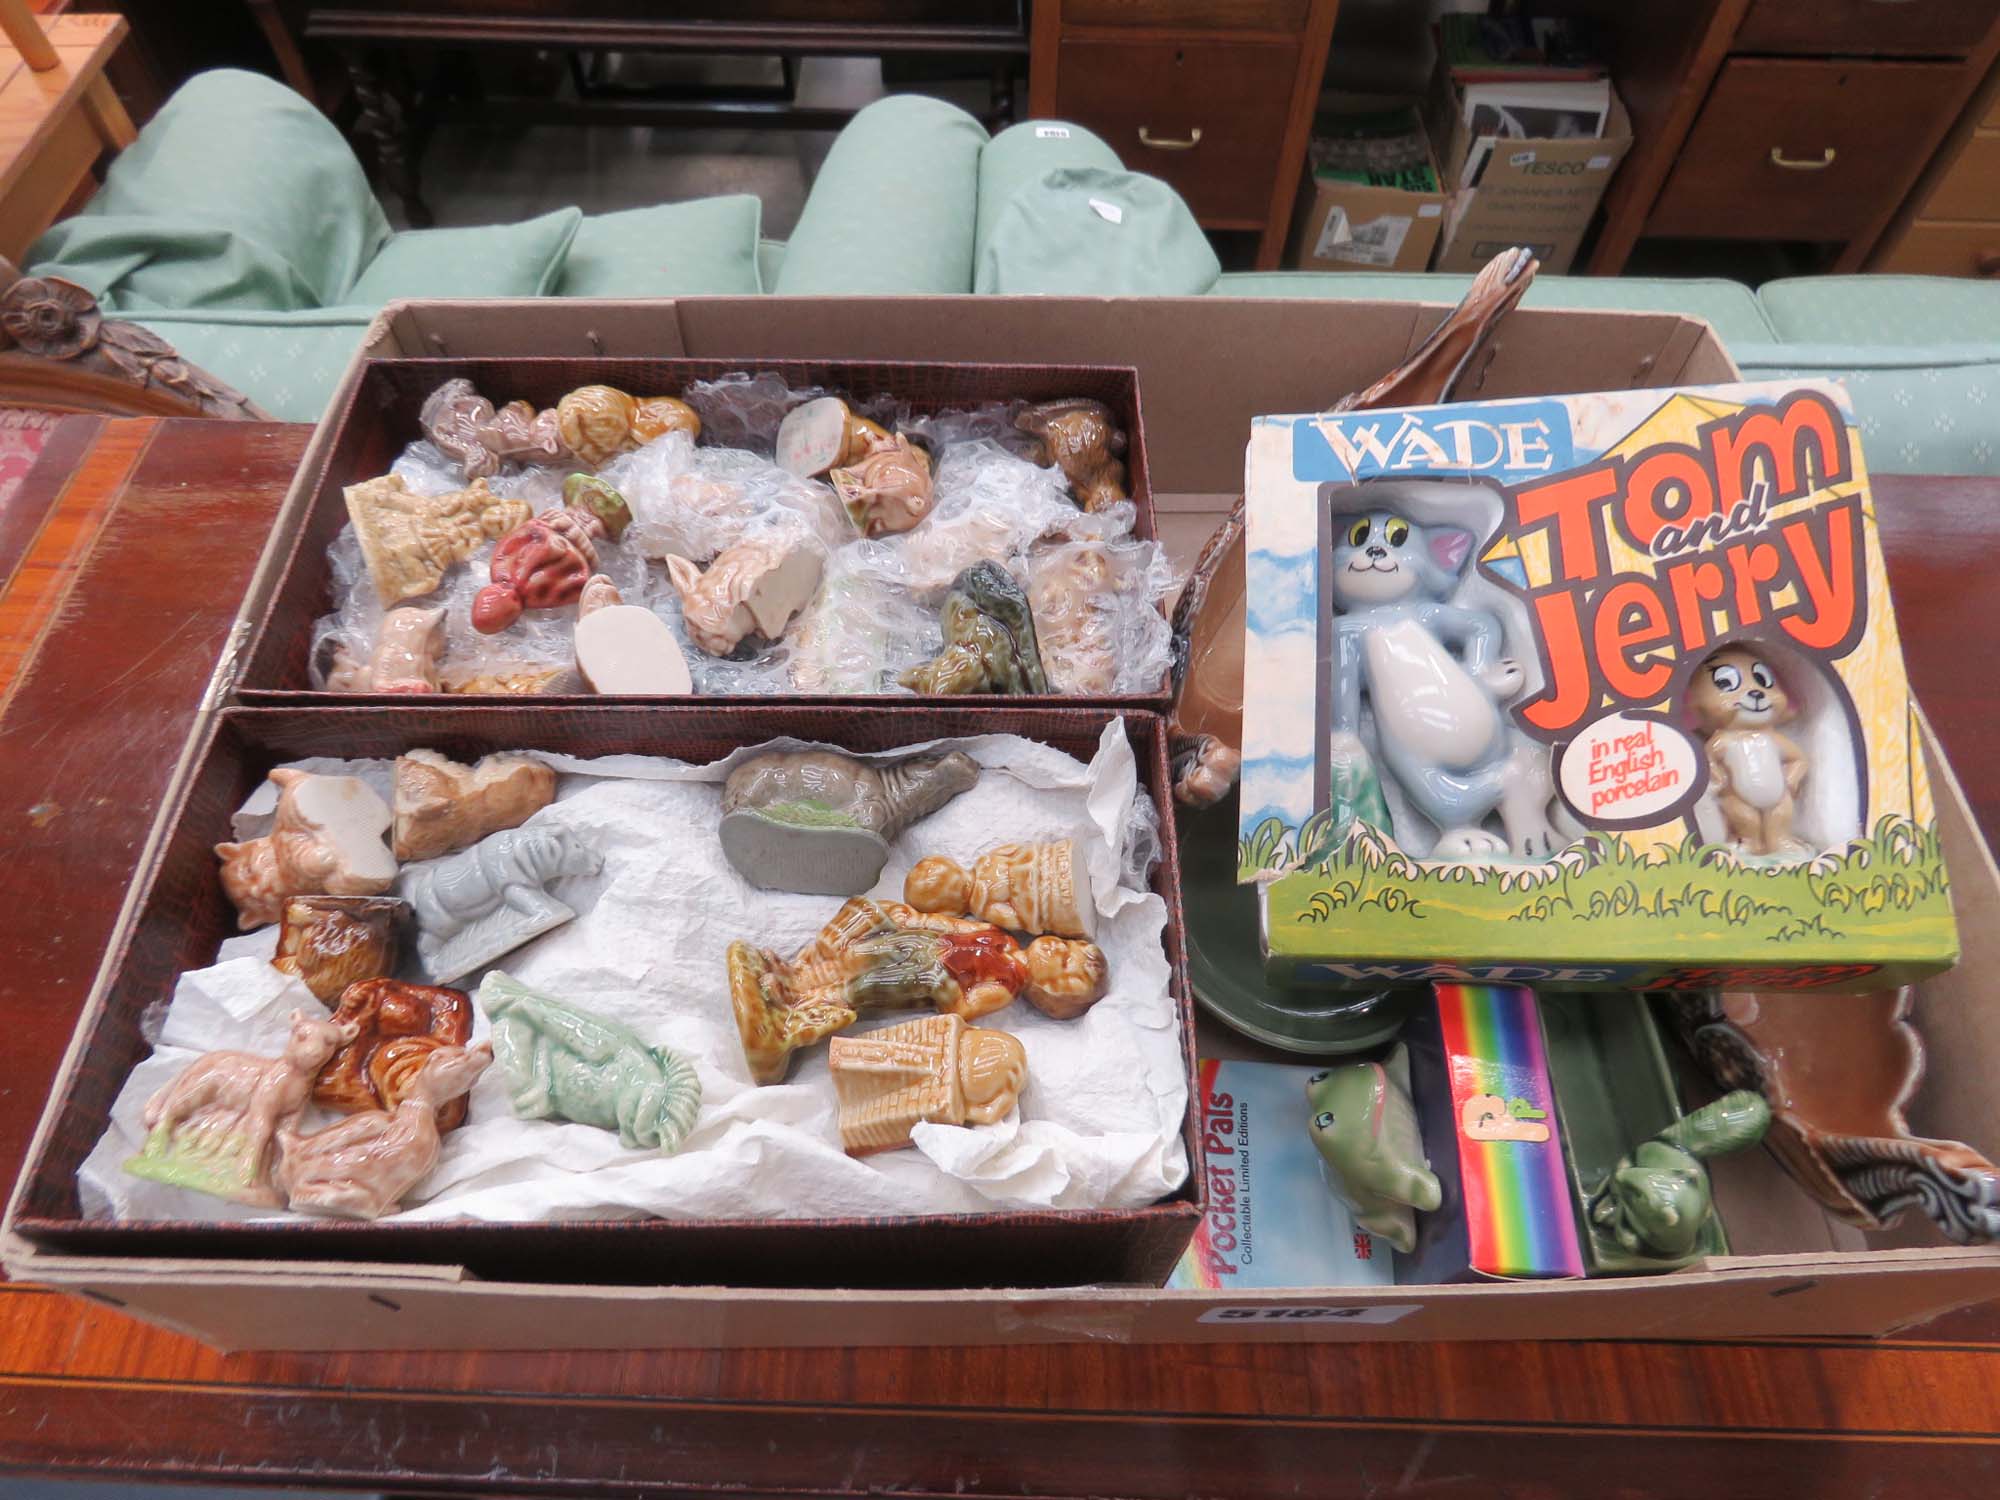 Box containing Wade Whimsies and other Wade figures